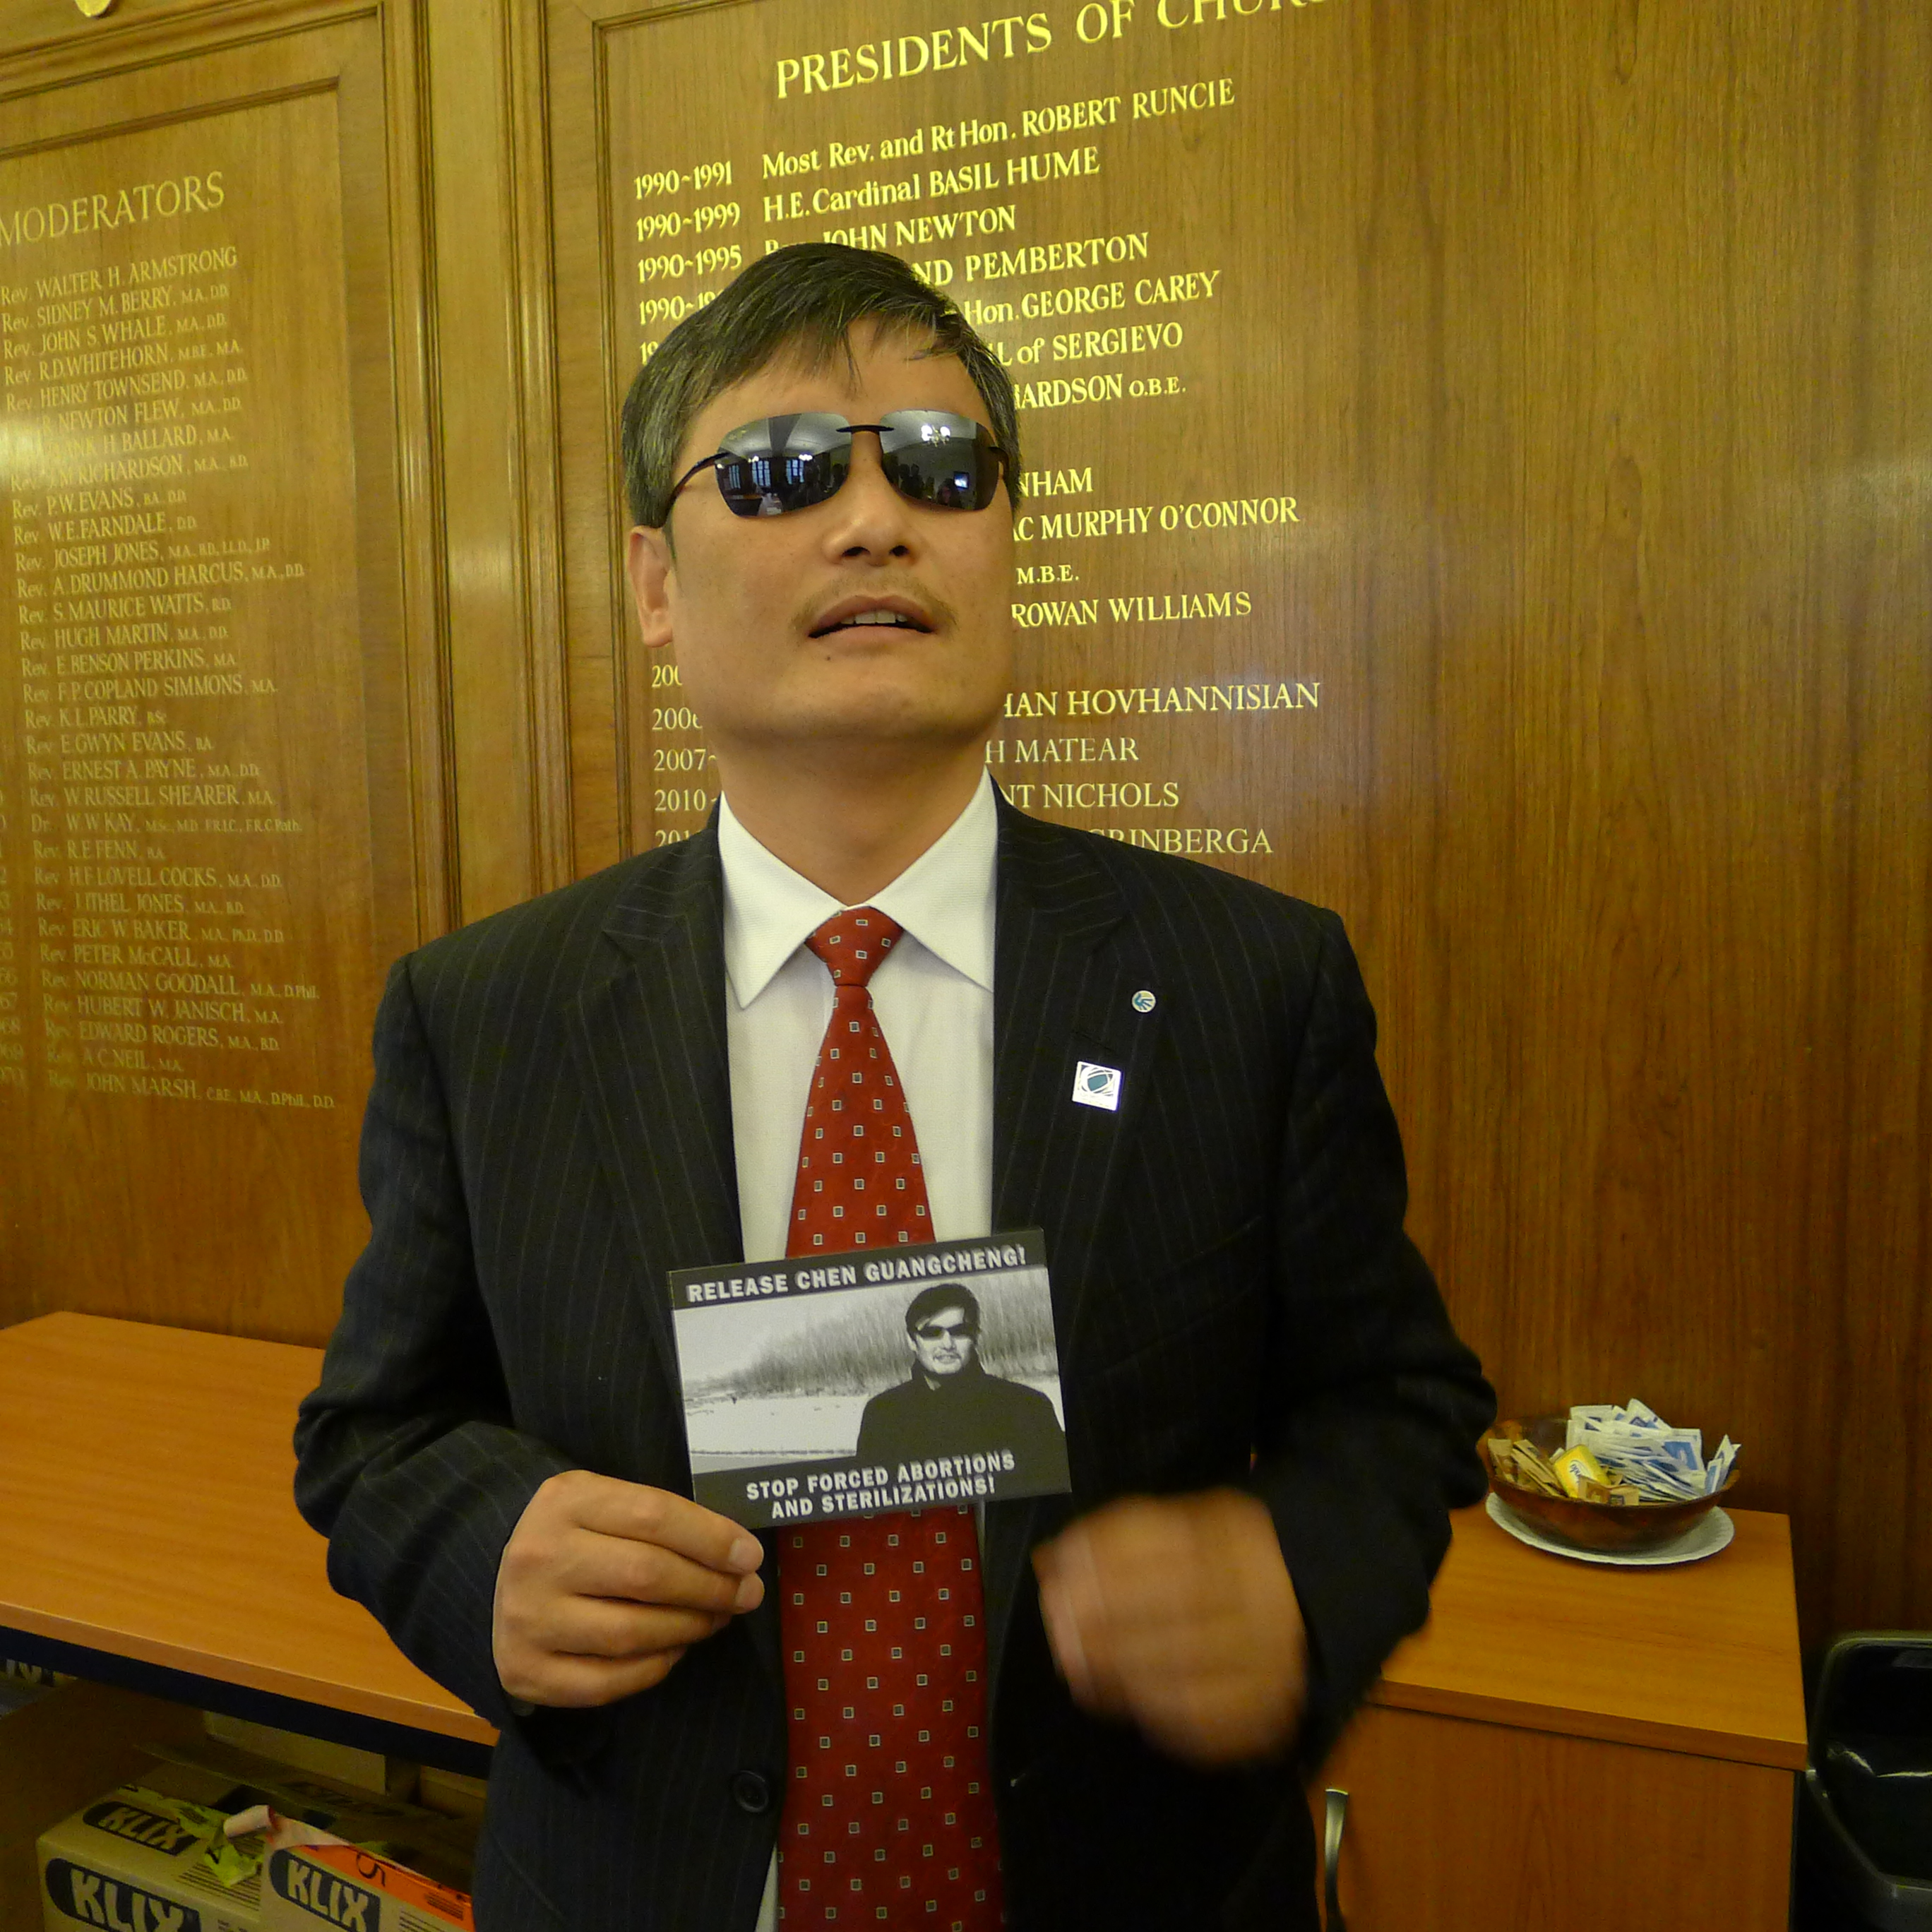 Chen Guangcheng holding one of the postcards produced by Jubilee Campaign and launched by David Alton and Danny Smith when Chen was sent to prison. Phyllis Bowman of Right To Life assisted with their distribution.